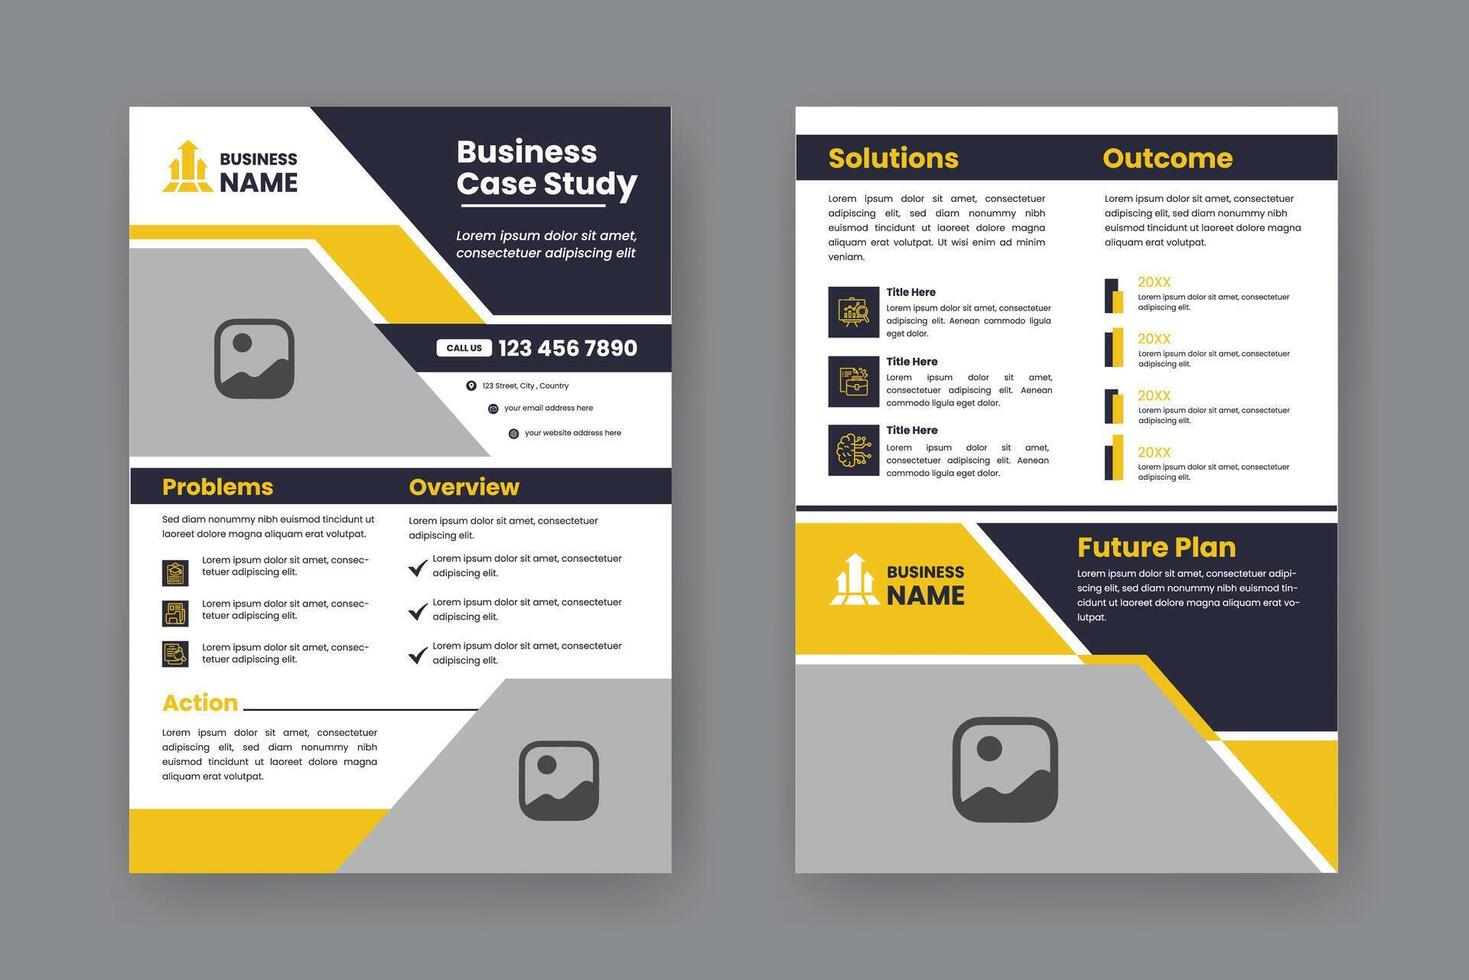 Case Study Layout Flyer. Minimalist Business Report with Simple Design. vector